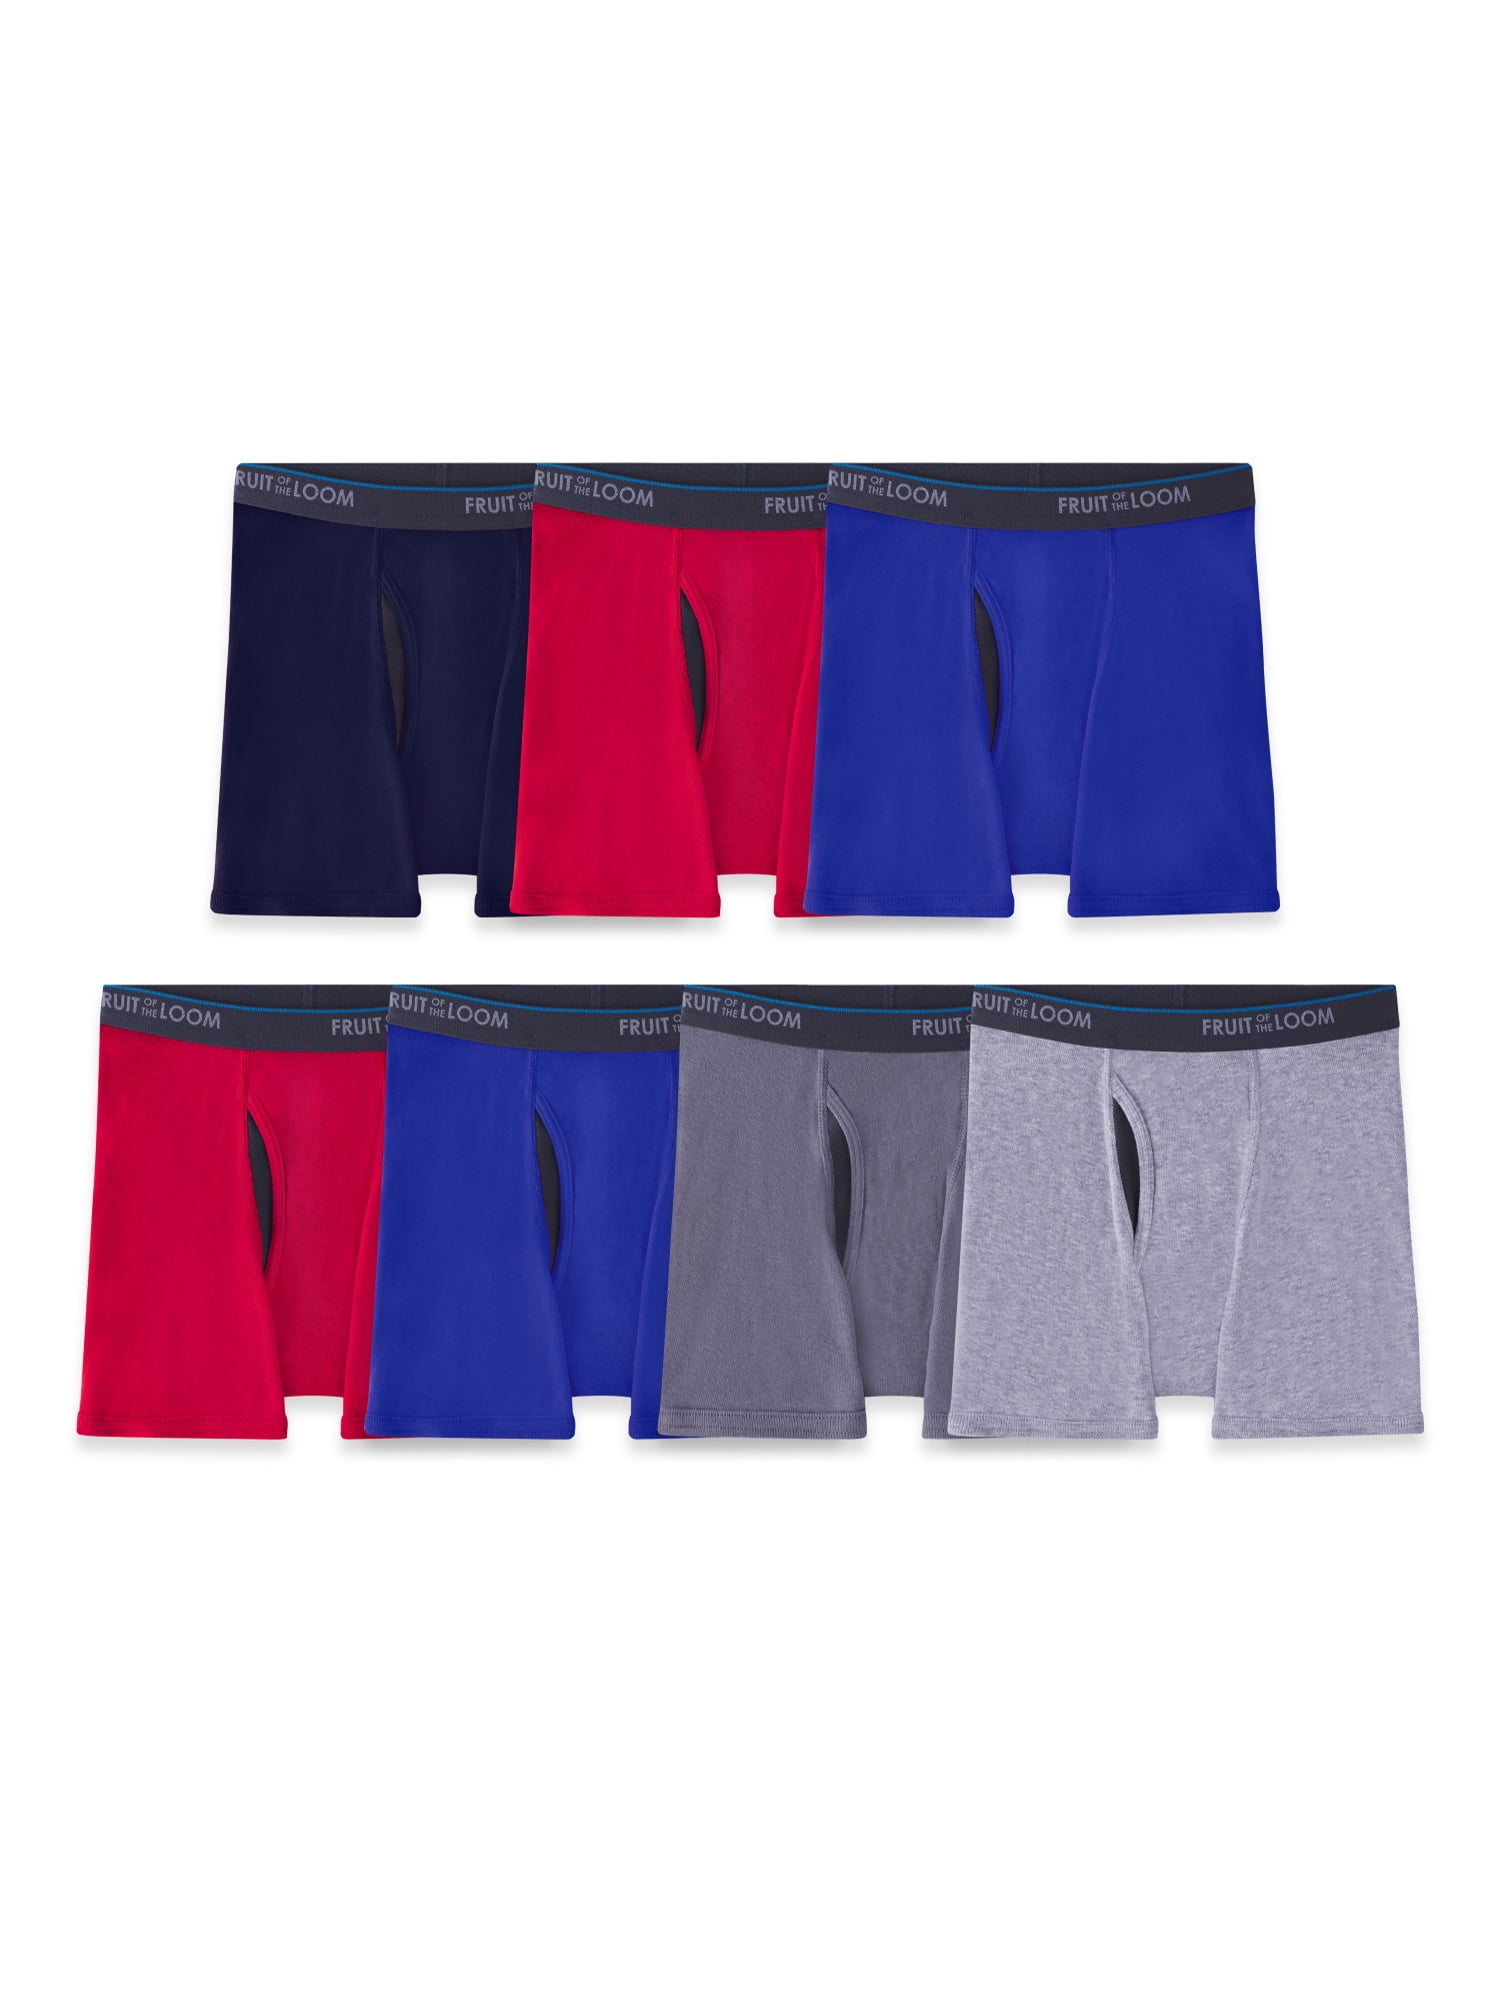 Fruit of the Loom Boys' Cotton Boxer Briefs, 10 Pack 